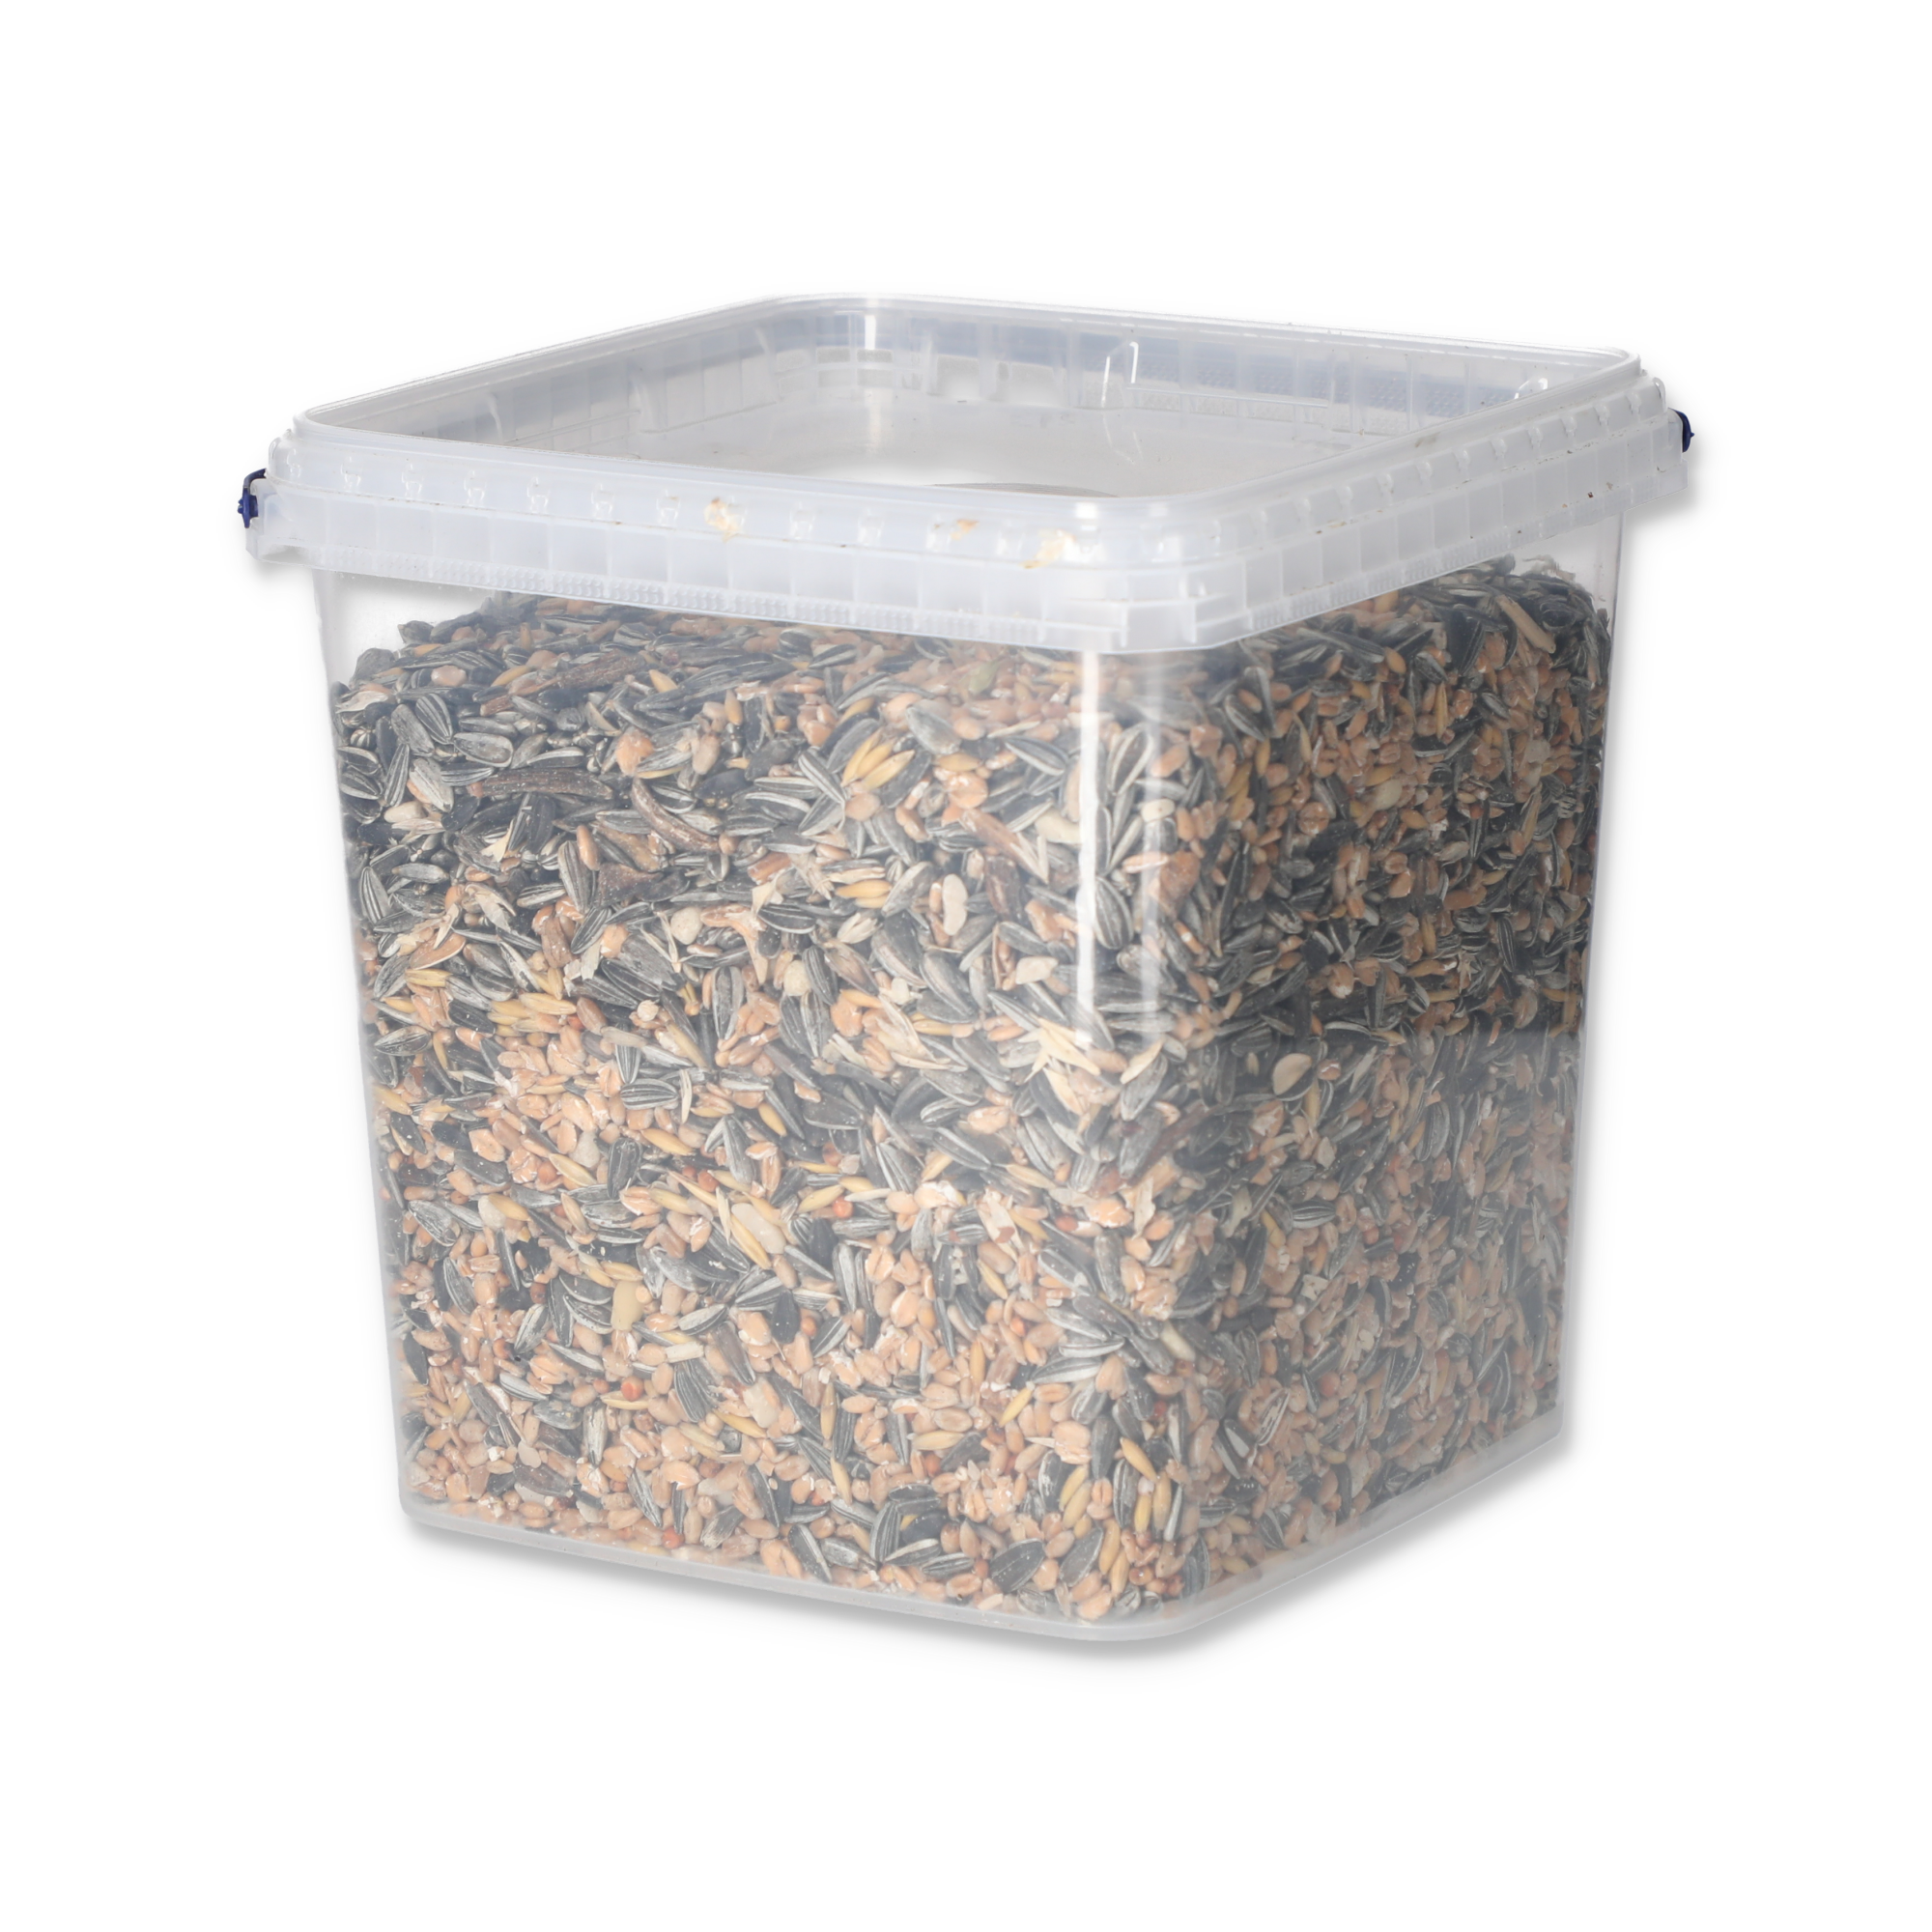 Wildvogelfutter Eimer 3 kg + product picture